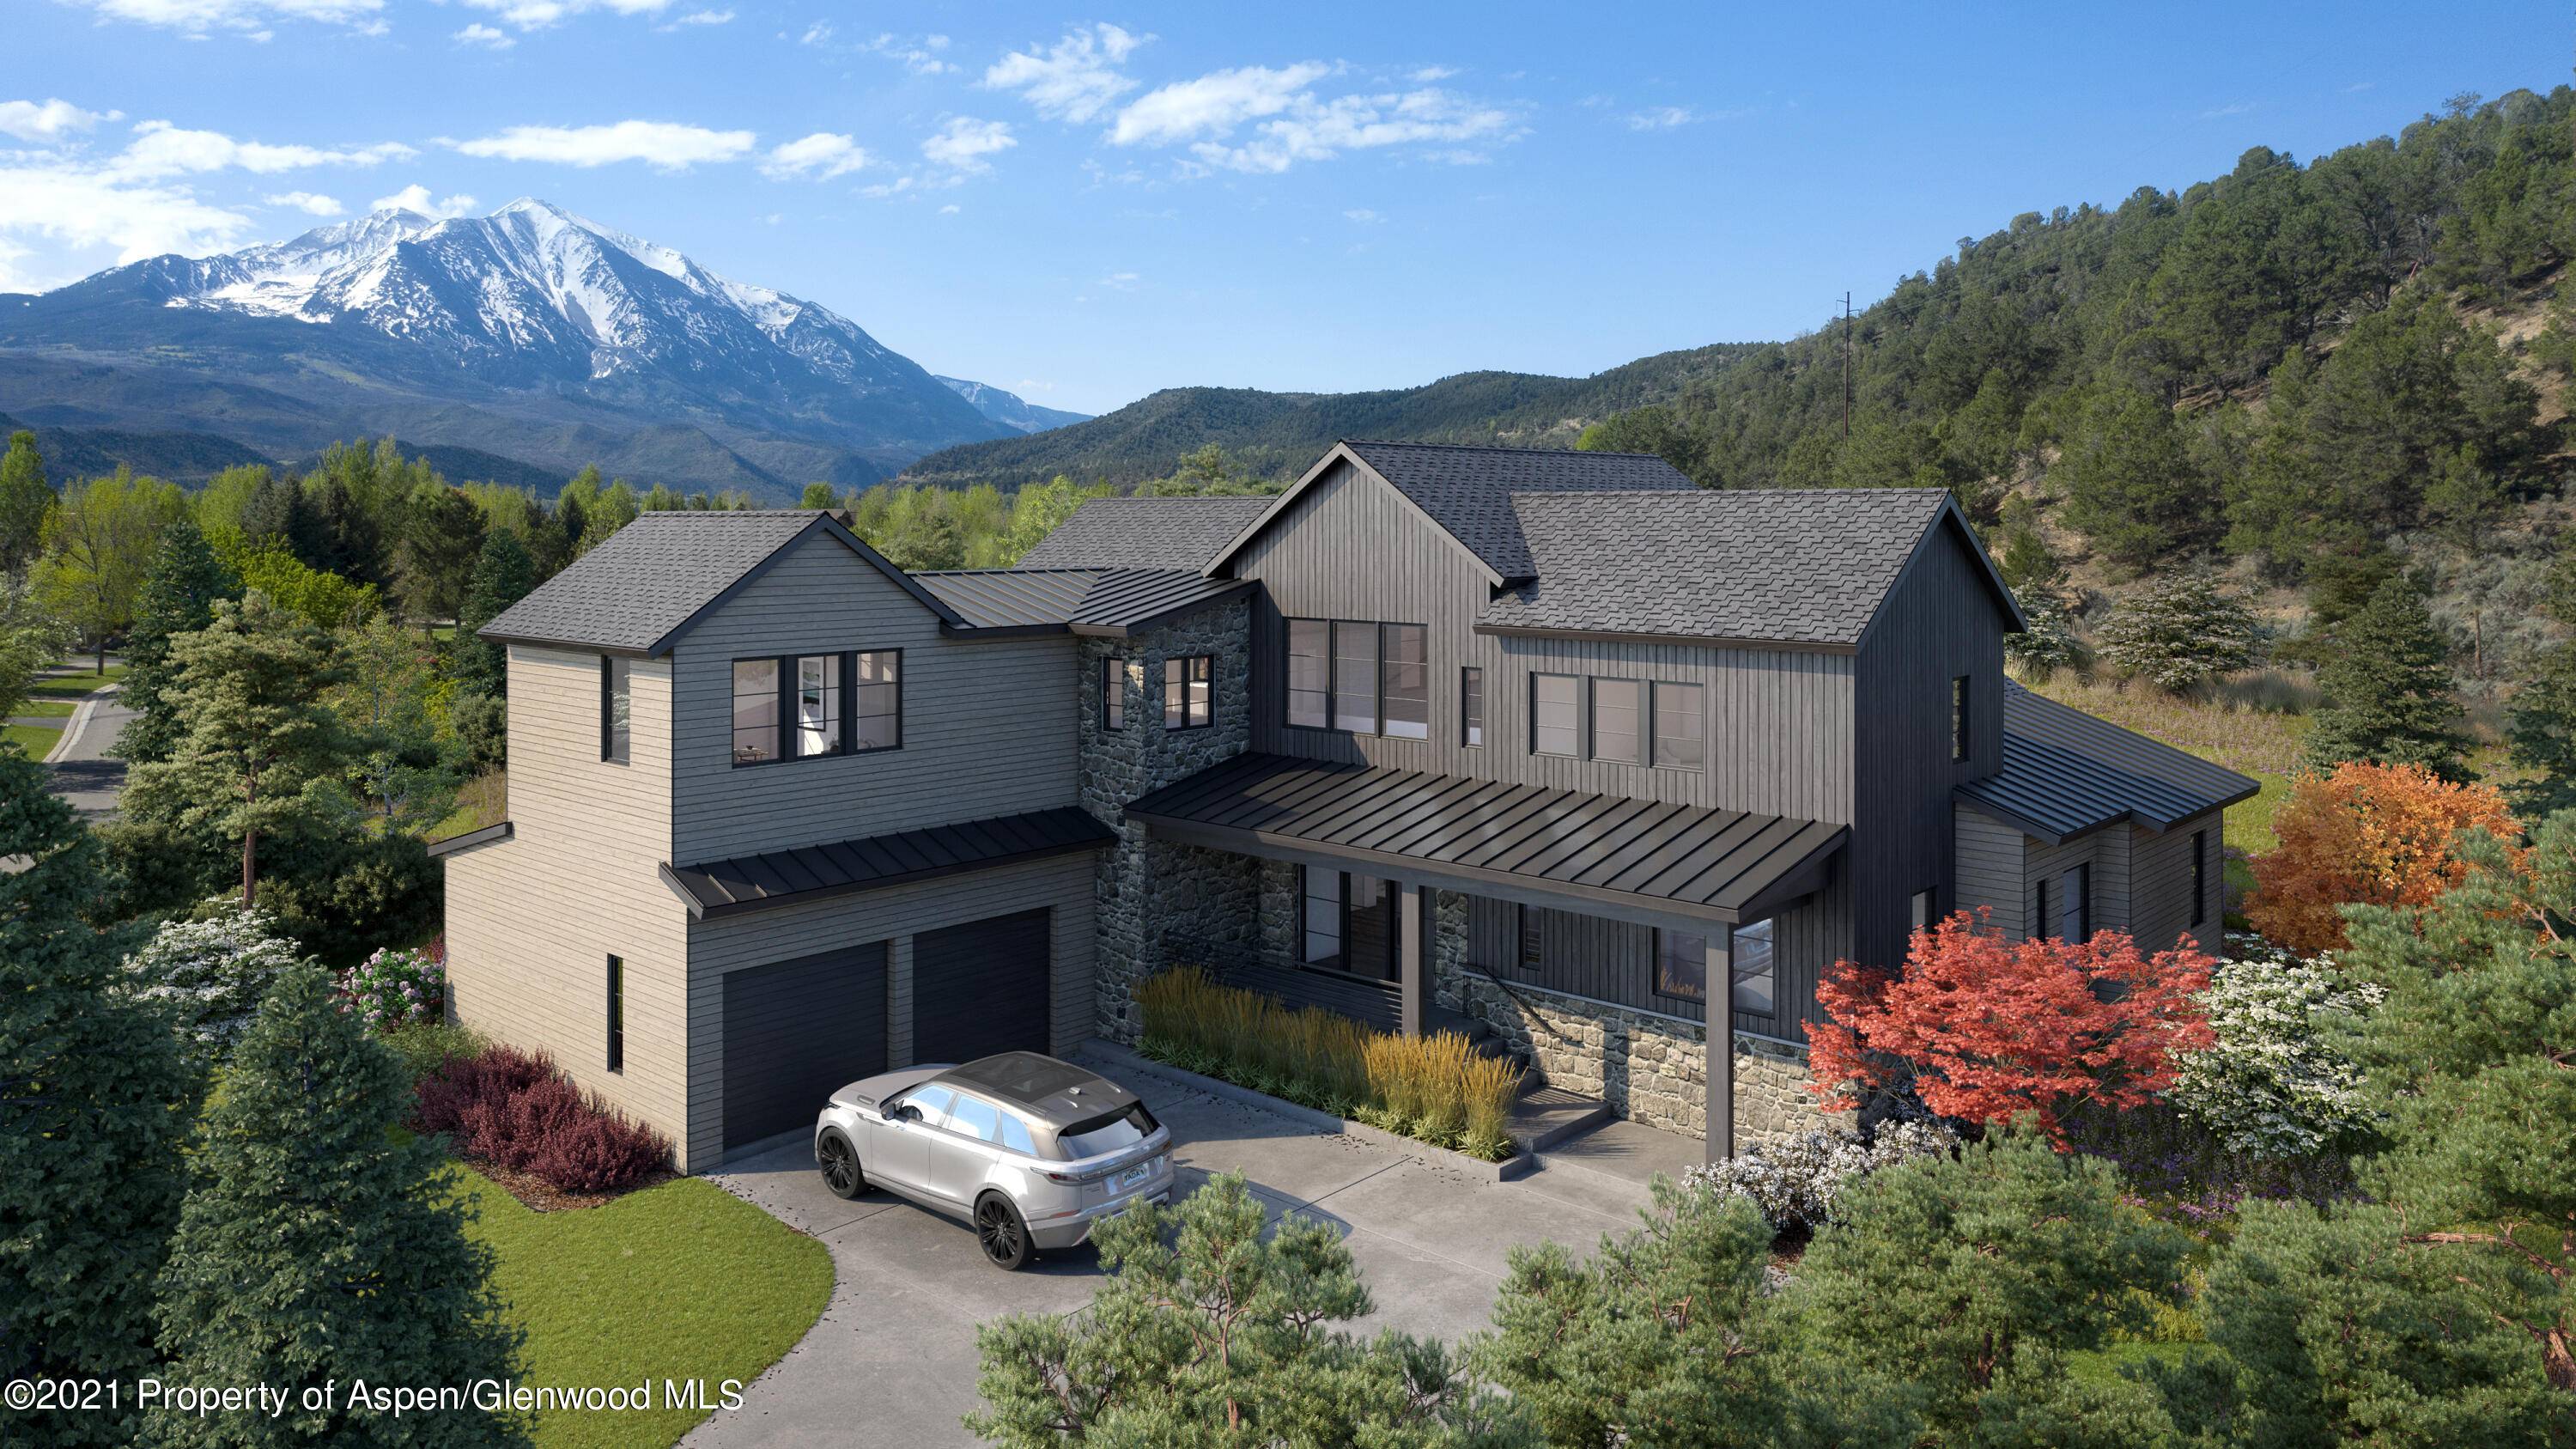 669 Perry Ridge is a contemporary mountain chalet in Roaring Fork Valley's River Valley Ranch community.